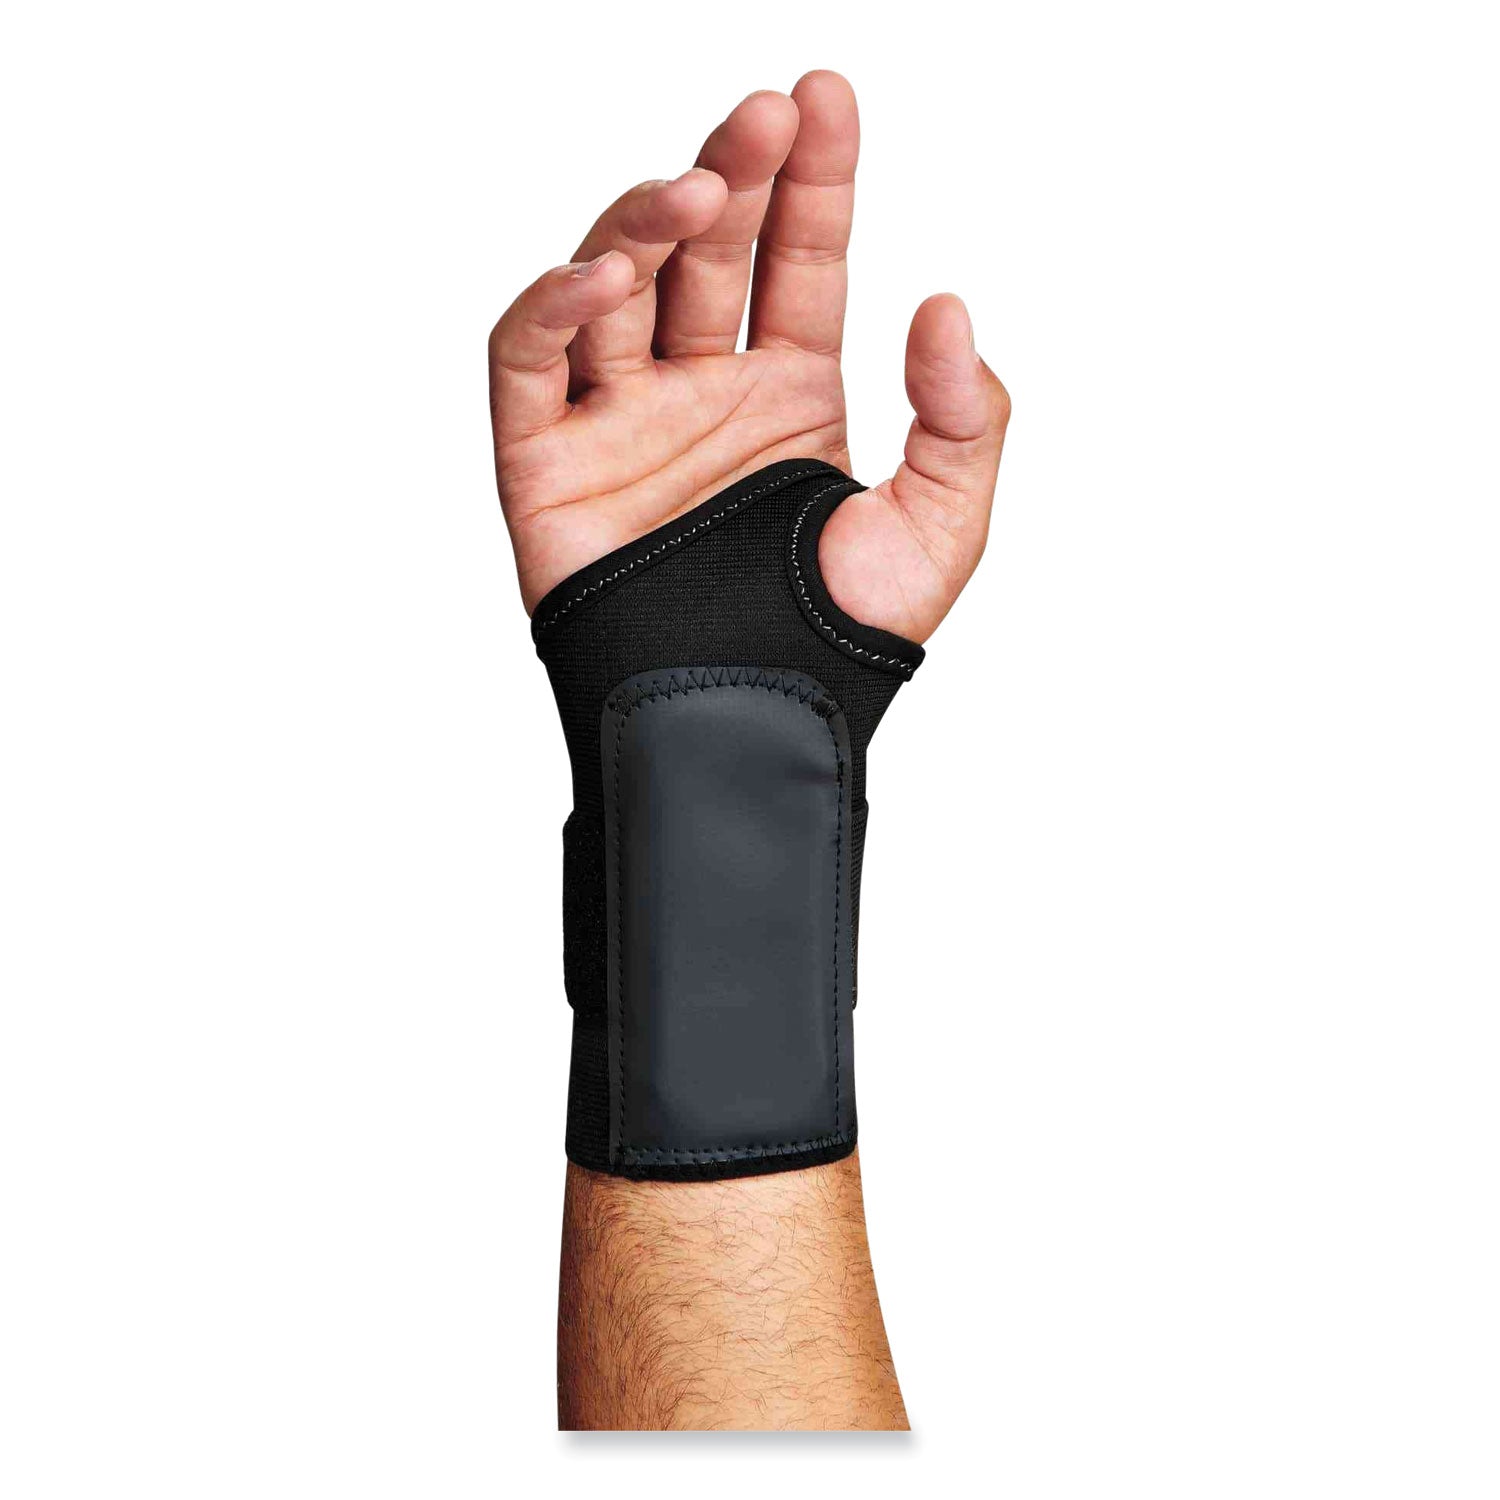 ProFlex 4000 Single Strap Wrist Support, Small, Fits Left Hand, Black, Ships in 1-3 Business Days - 